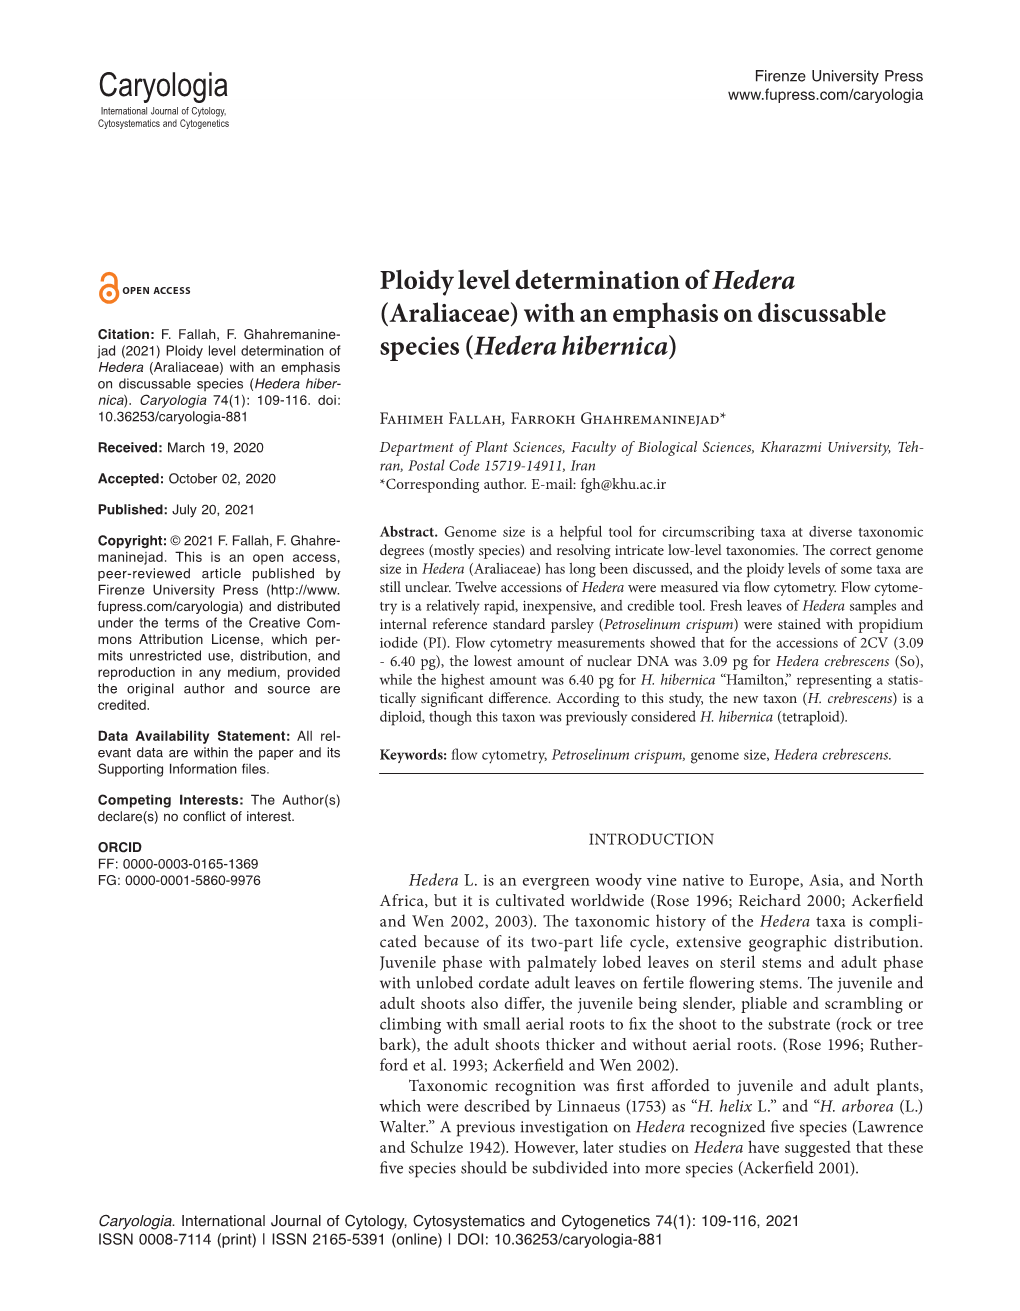 Ploidy Level Determination of Hedera (Araliaceae) with an Emphasis on Discussable Citation: F